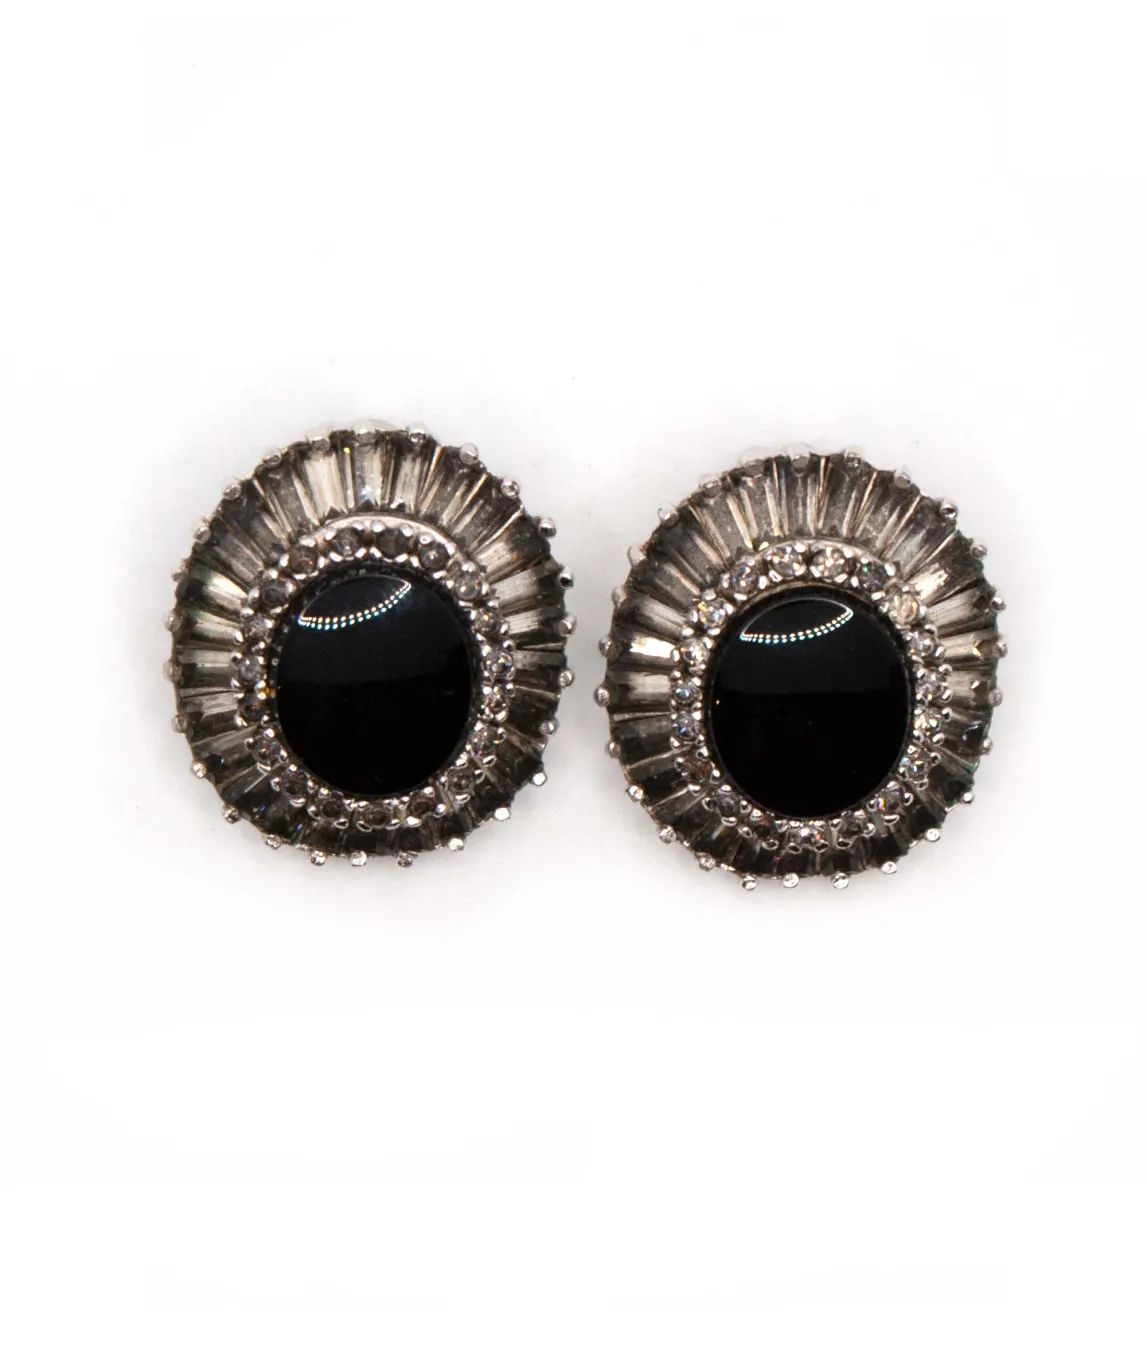 1980s Panetta earrings with onyx and baguette crystals